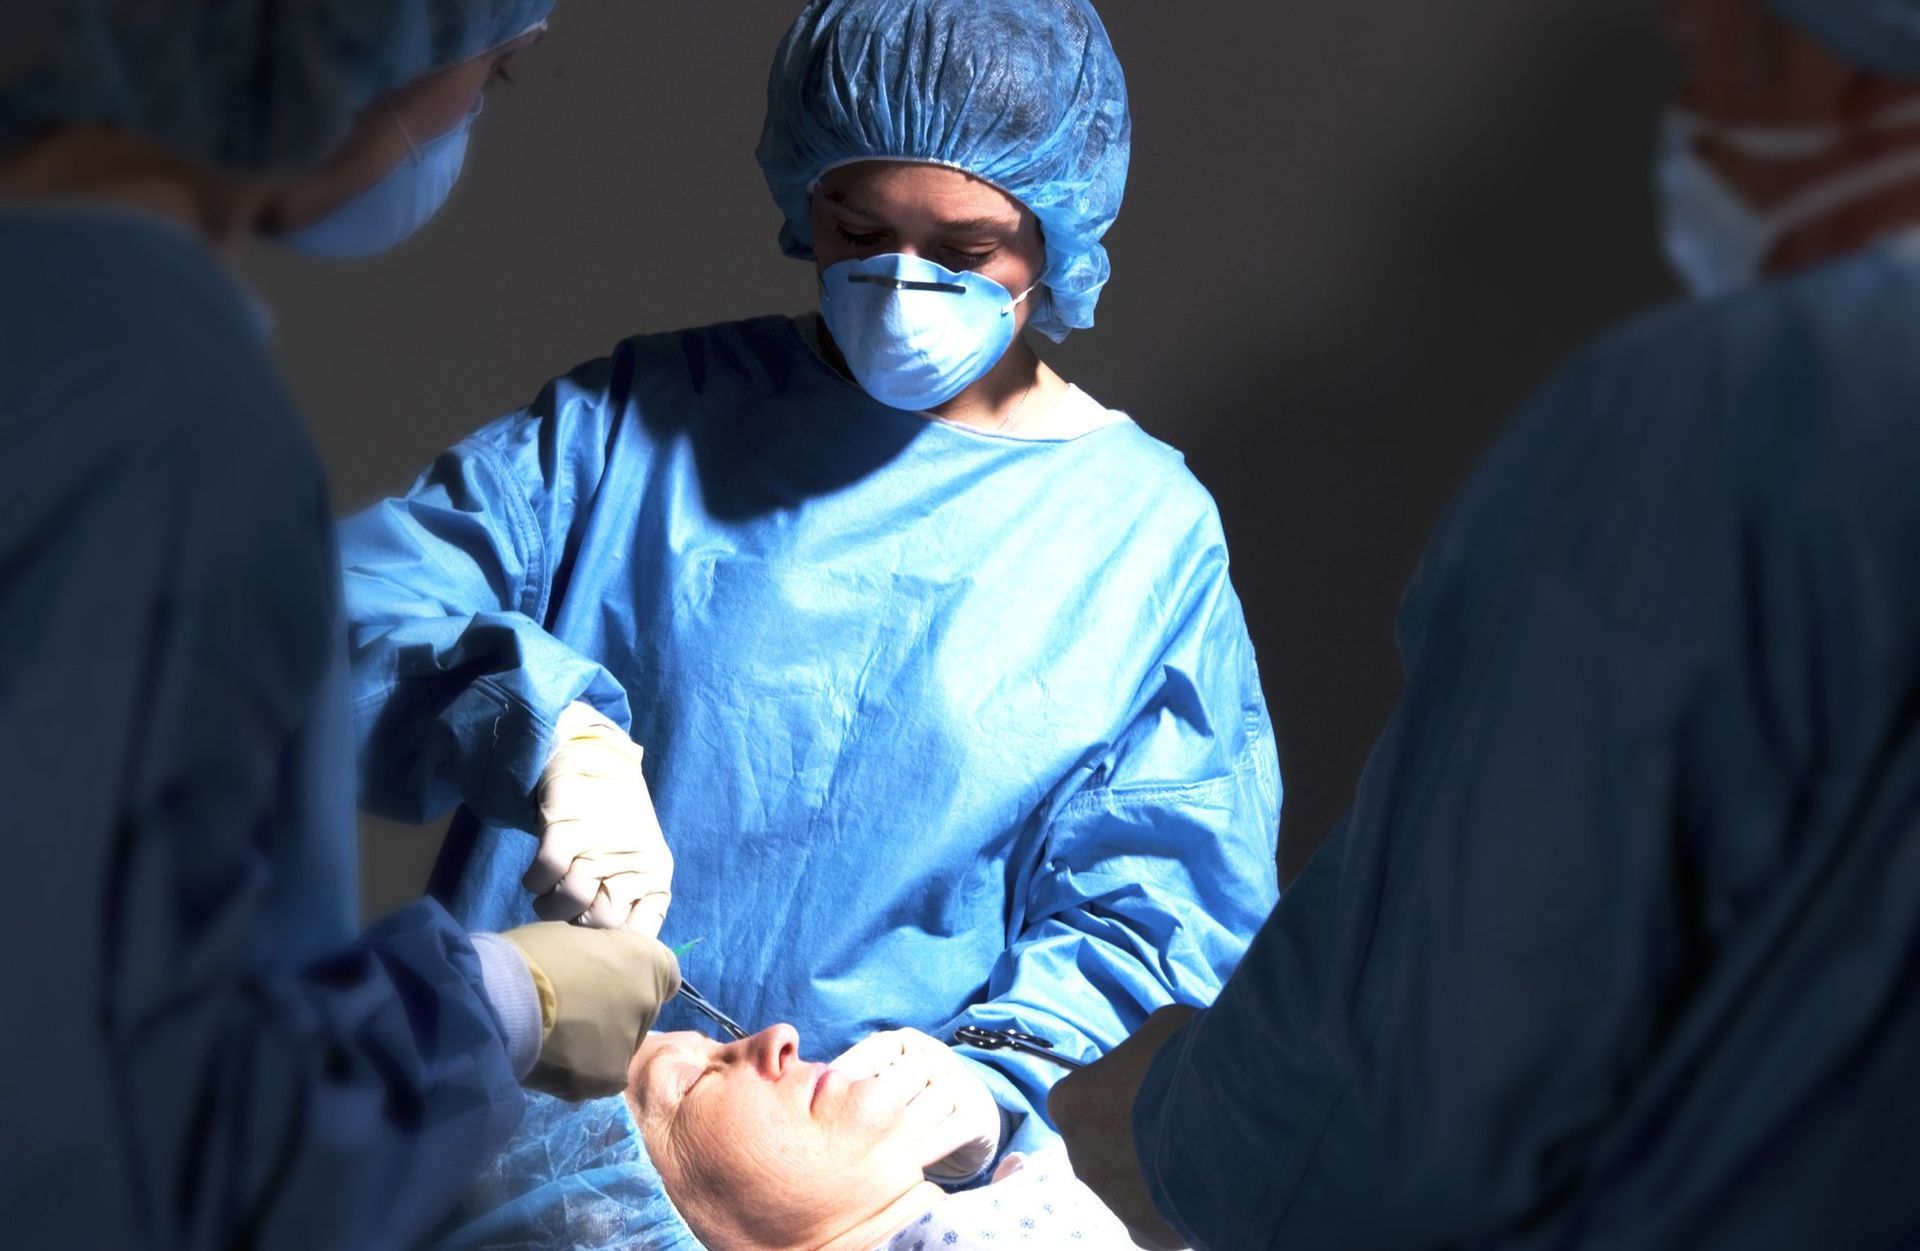 a group of surgeons are performing surgery on a patient